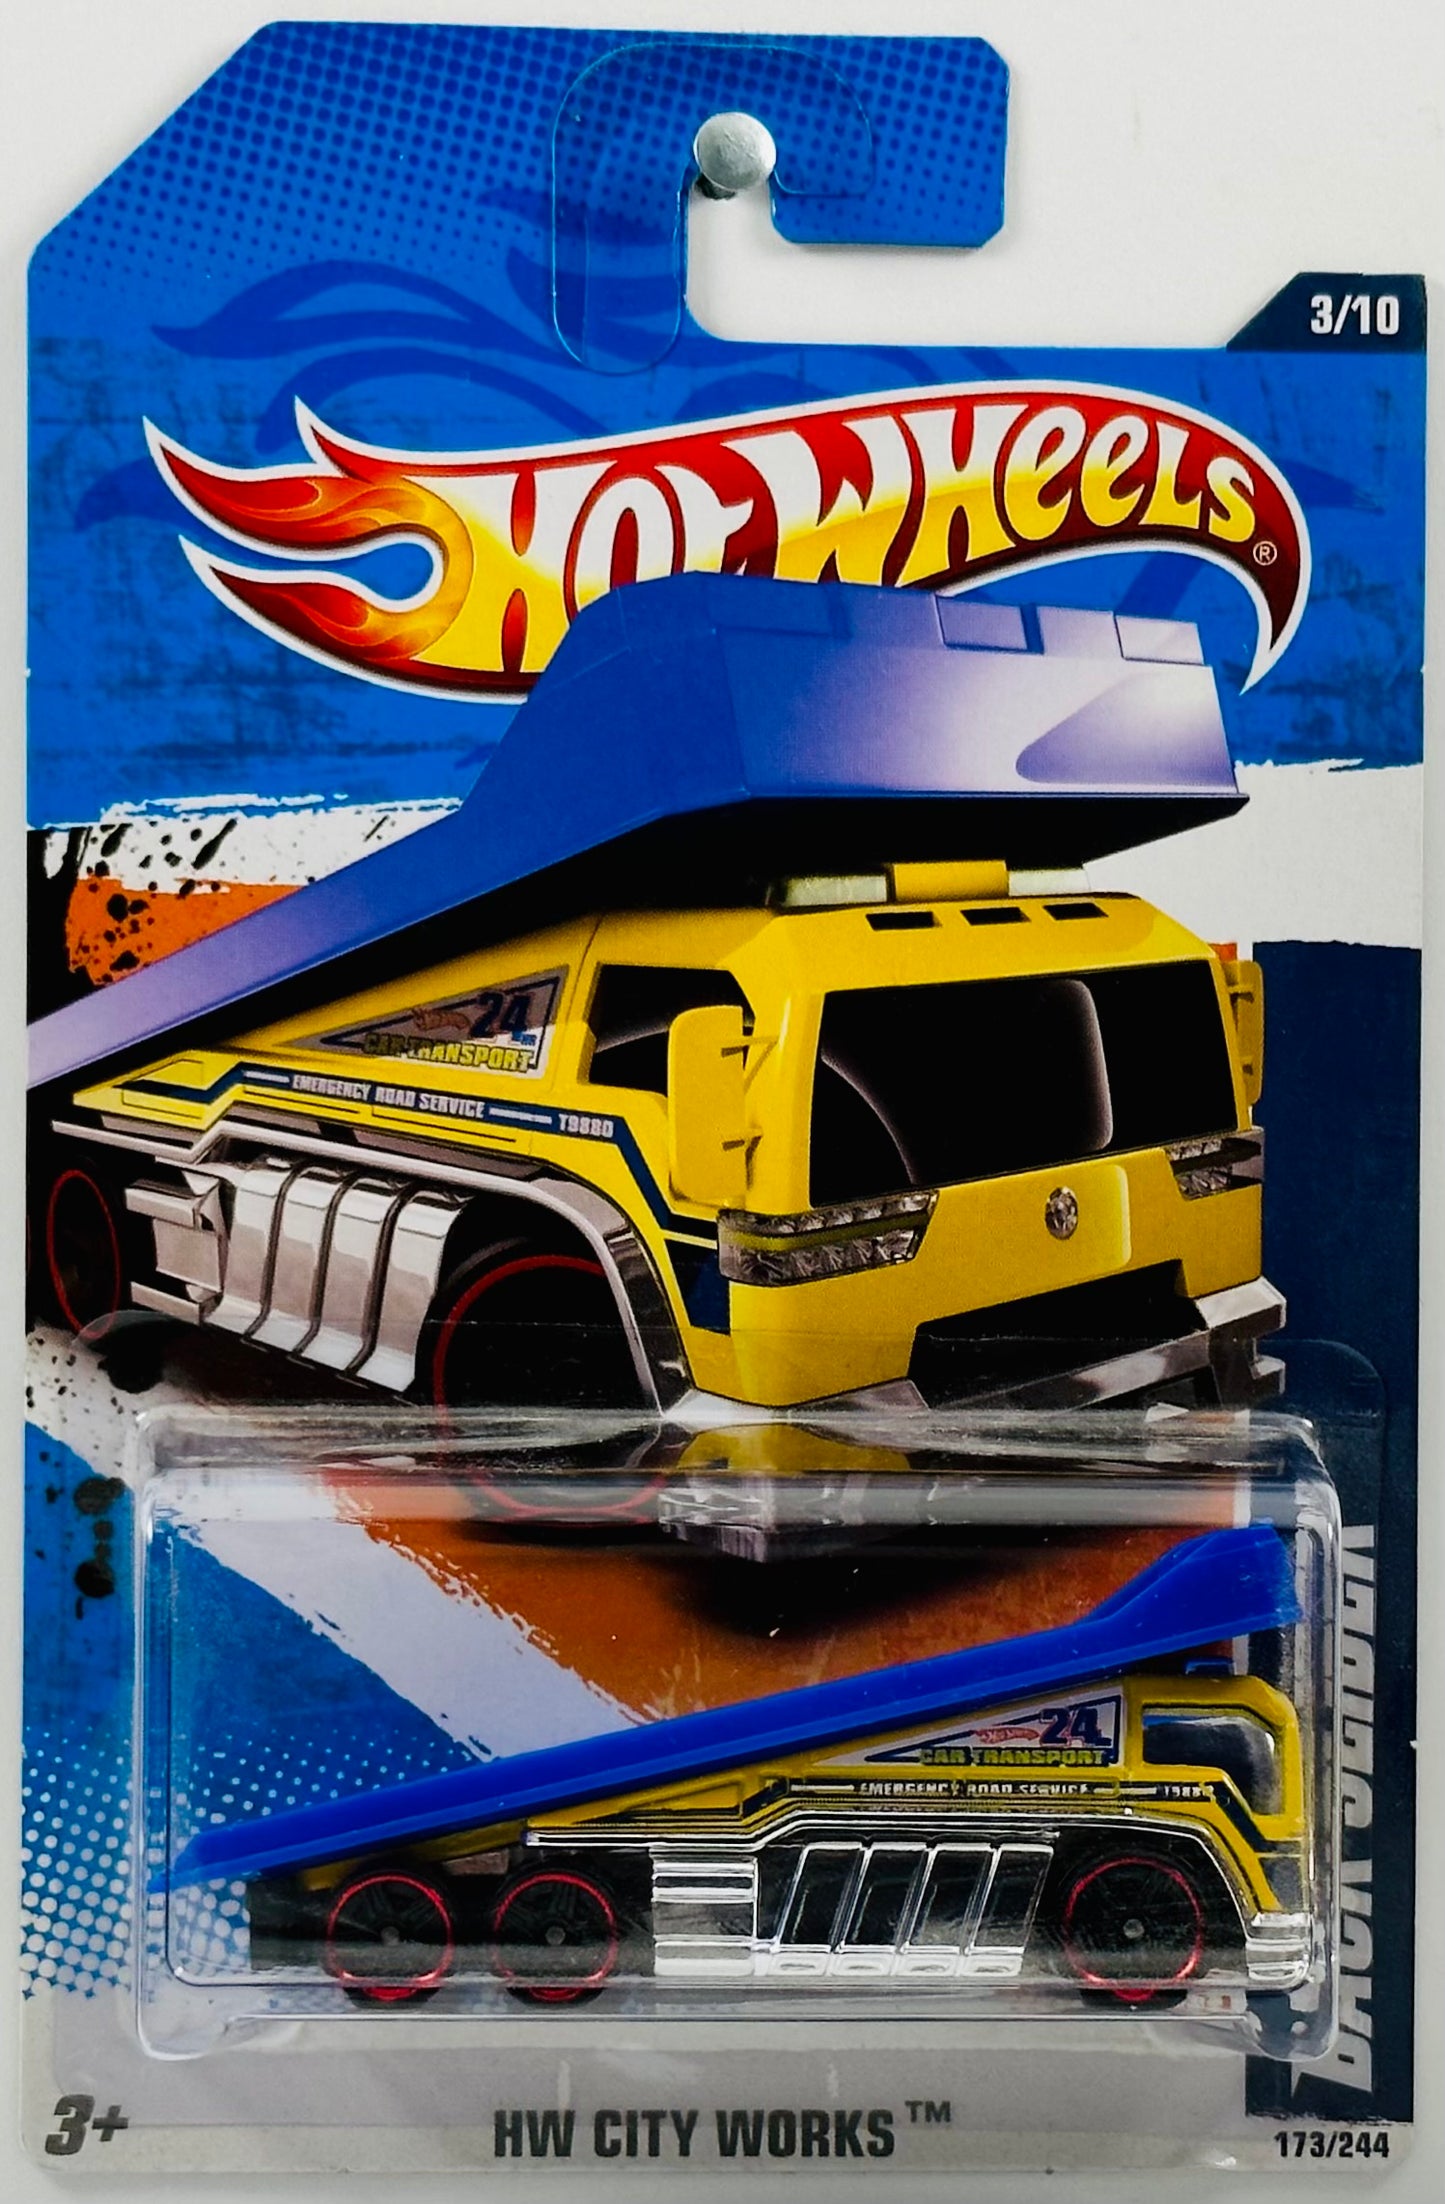 Hot Wheels 2011 - Collector # 173/244 - HW City Works 03/10 - Back Slider - Yellow - Blue Ramp - USA